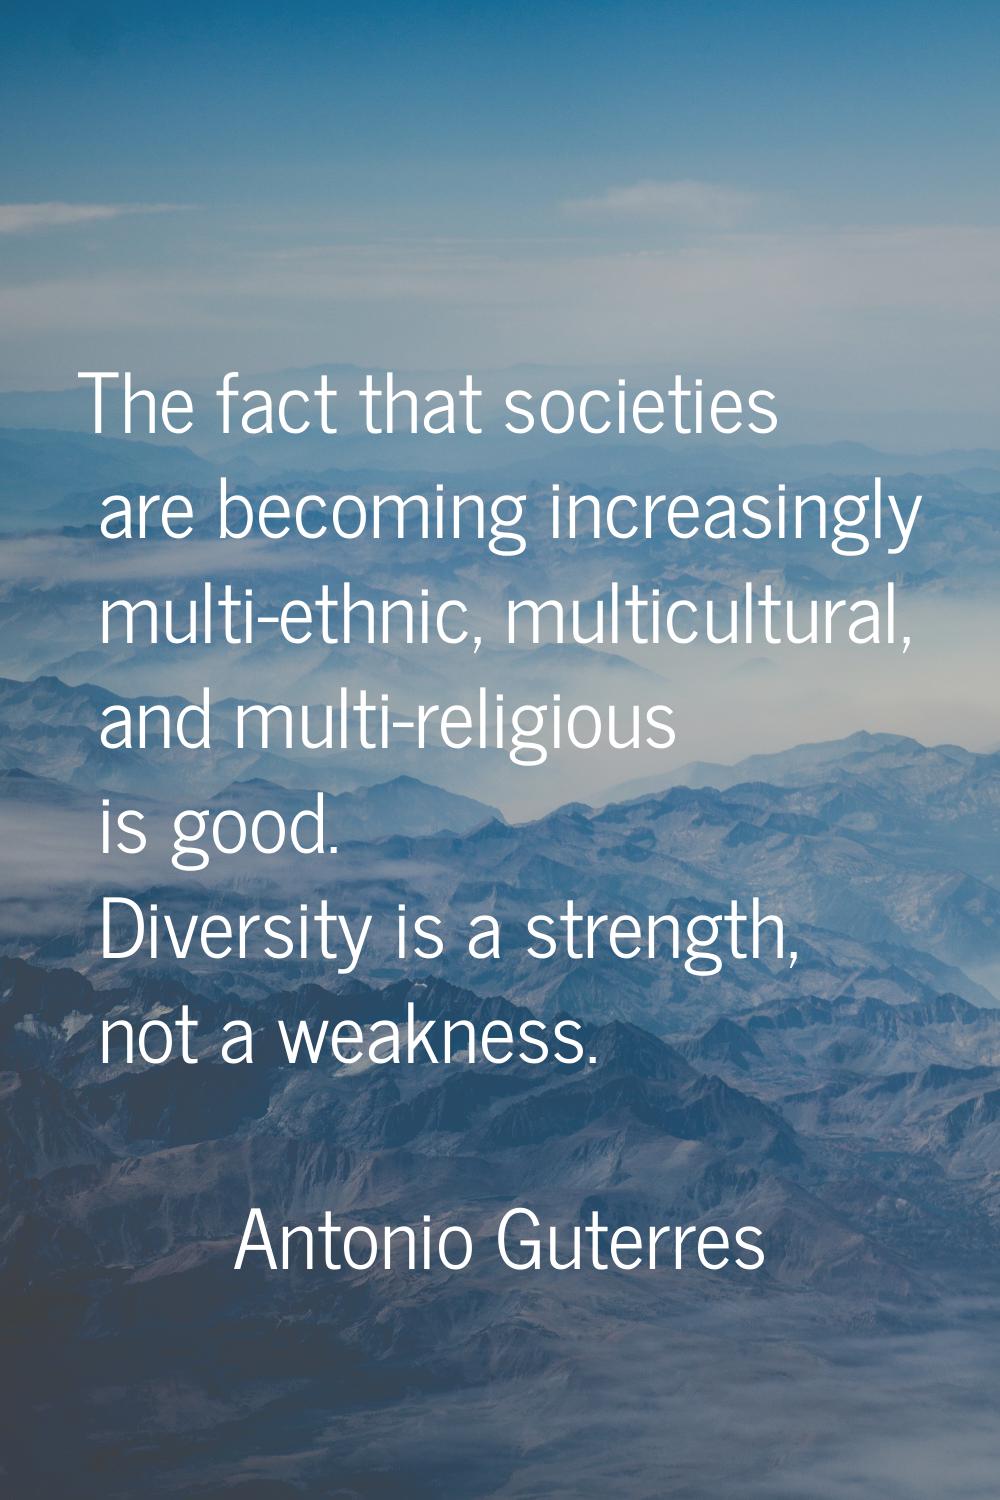 The fact that societies are becoming increasingly multi-ethnic, multicultural, and multi-religious 